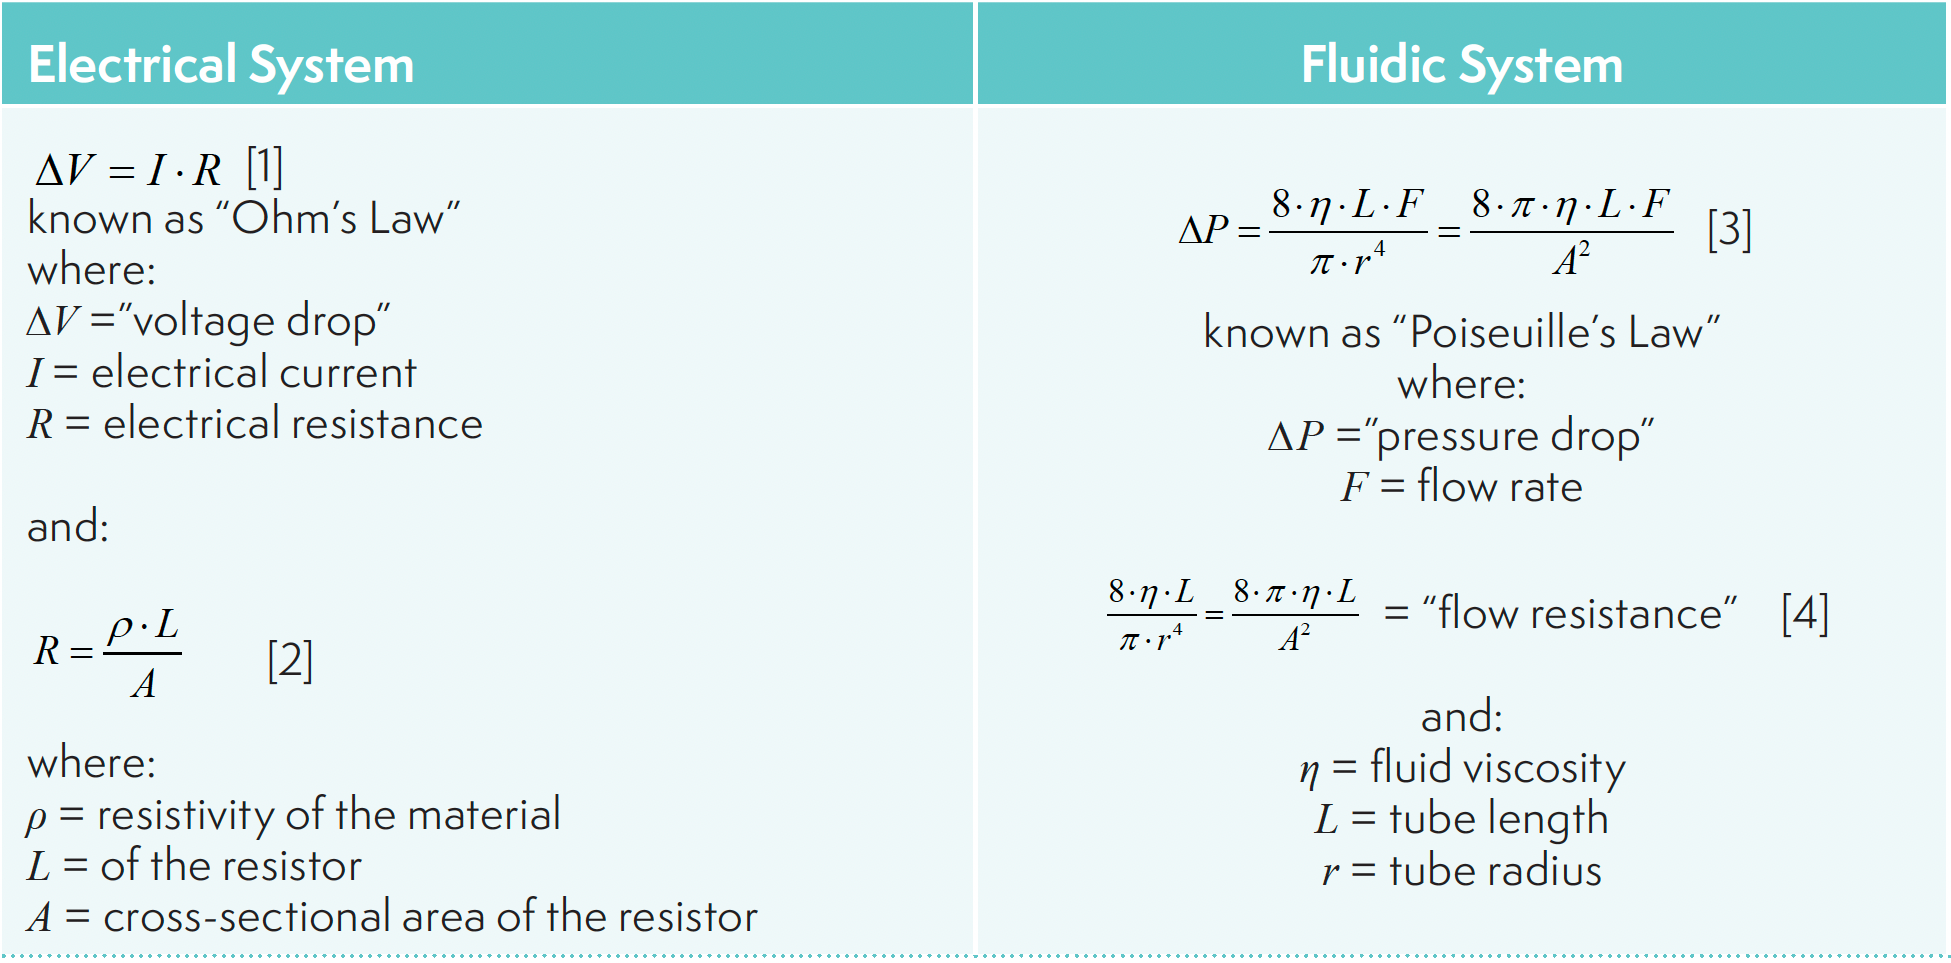 TABLE I: Comparison of concepts in electrical and fluidic systems